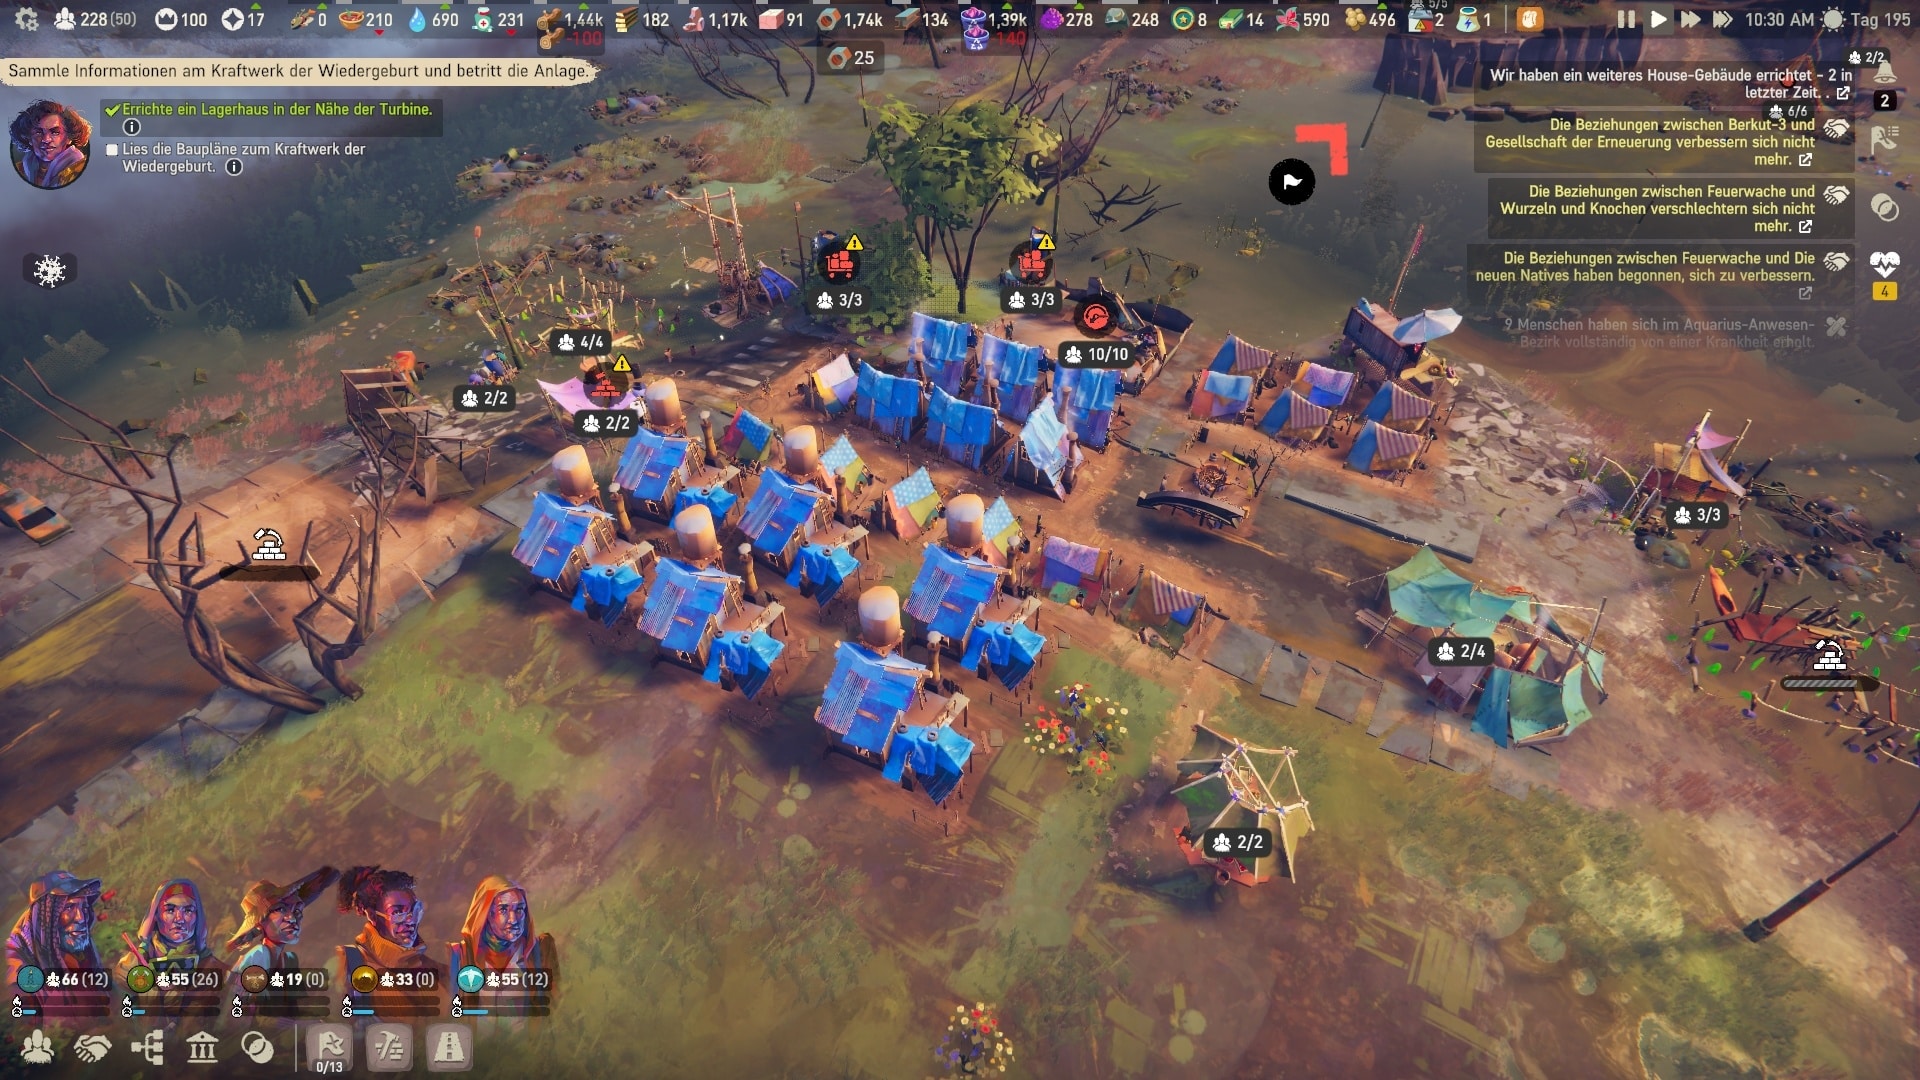 (Once the settlement has grown, we slowly expand the tents (at the back) into proper dwellings or replace them with more solid buildings (at the front).)